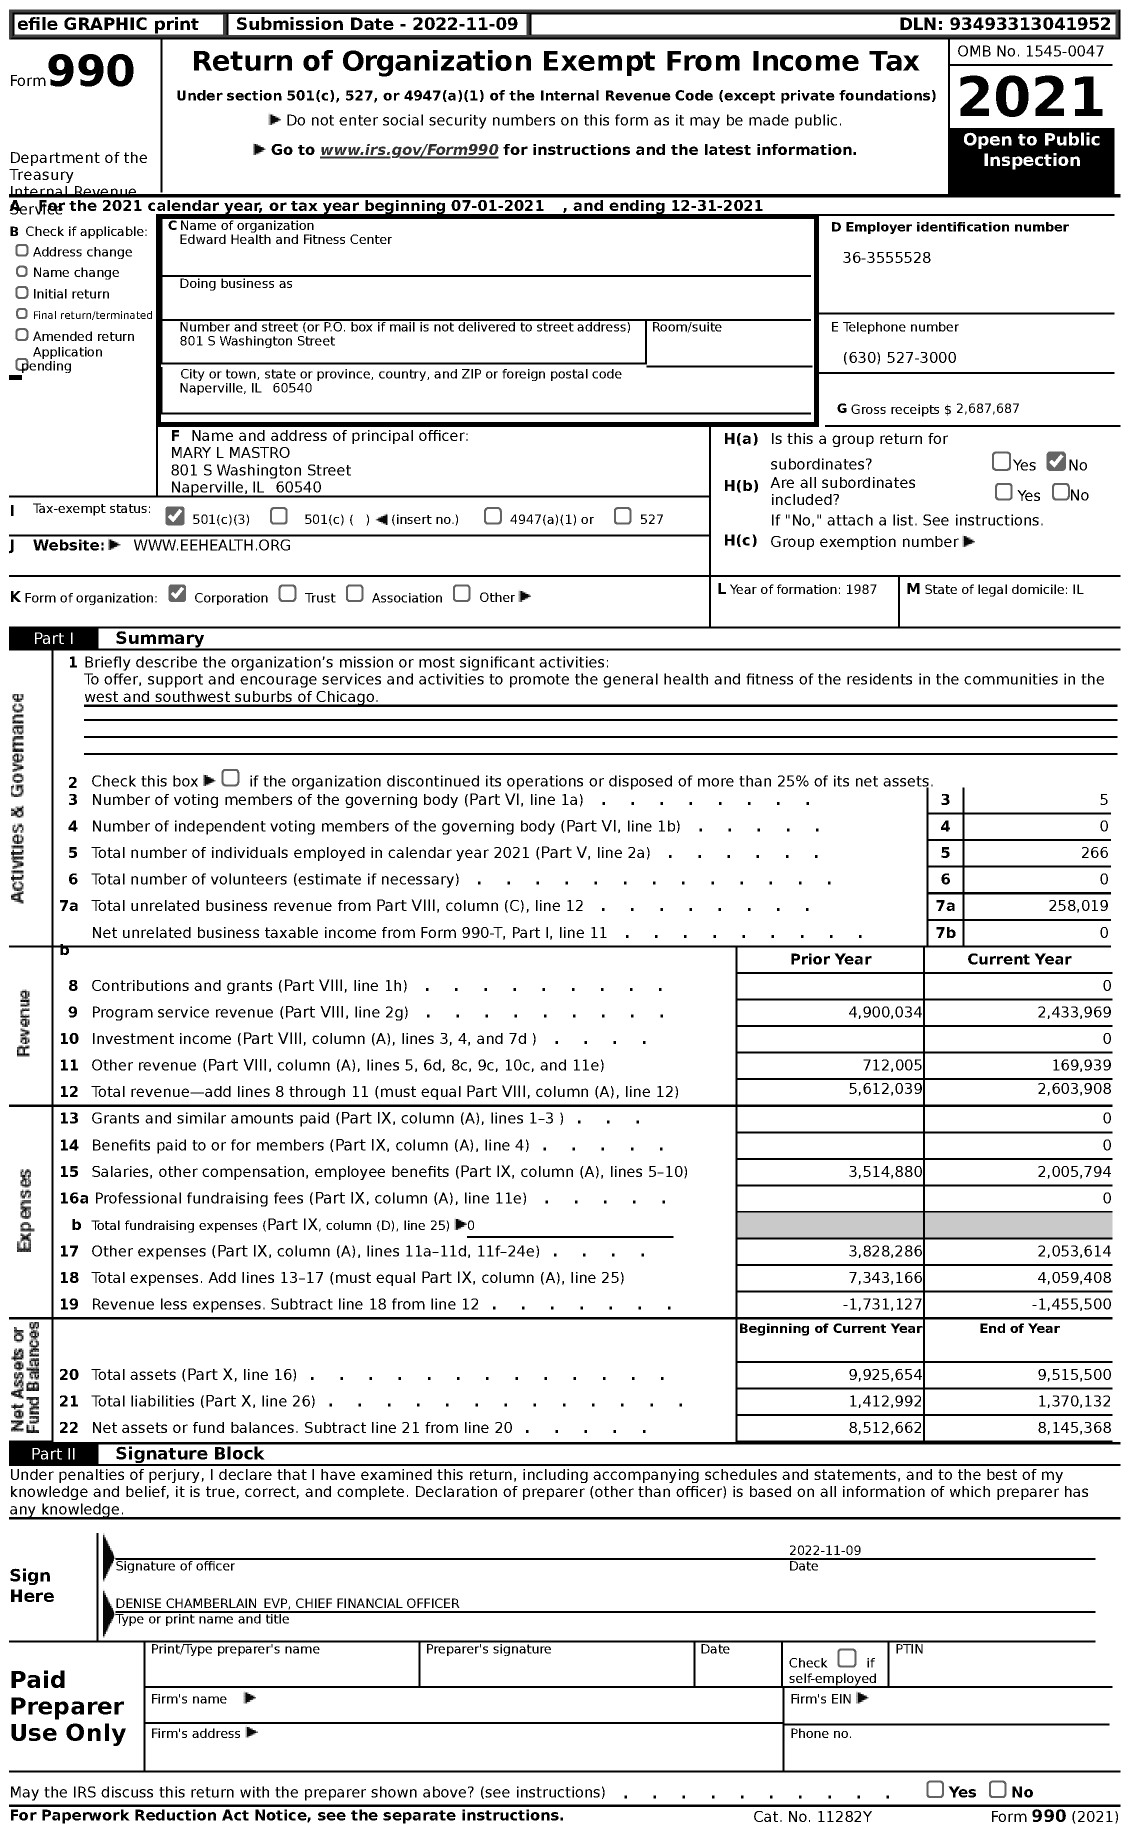 Image of first page of 2021 Form 990 for Edward Health and Fitness Centers